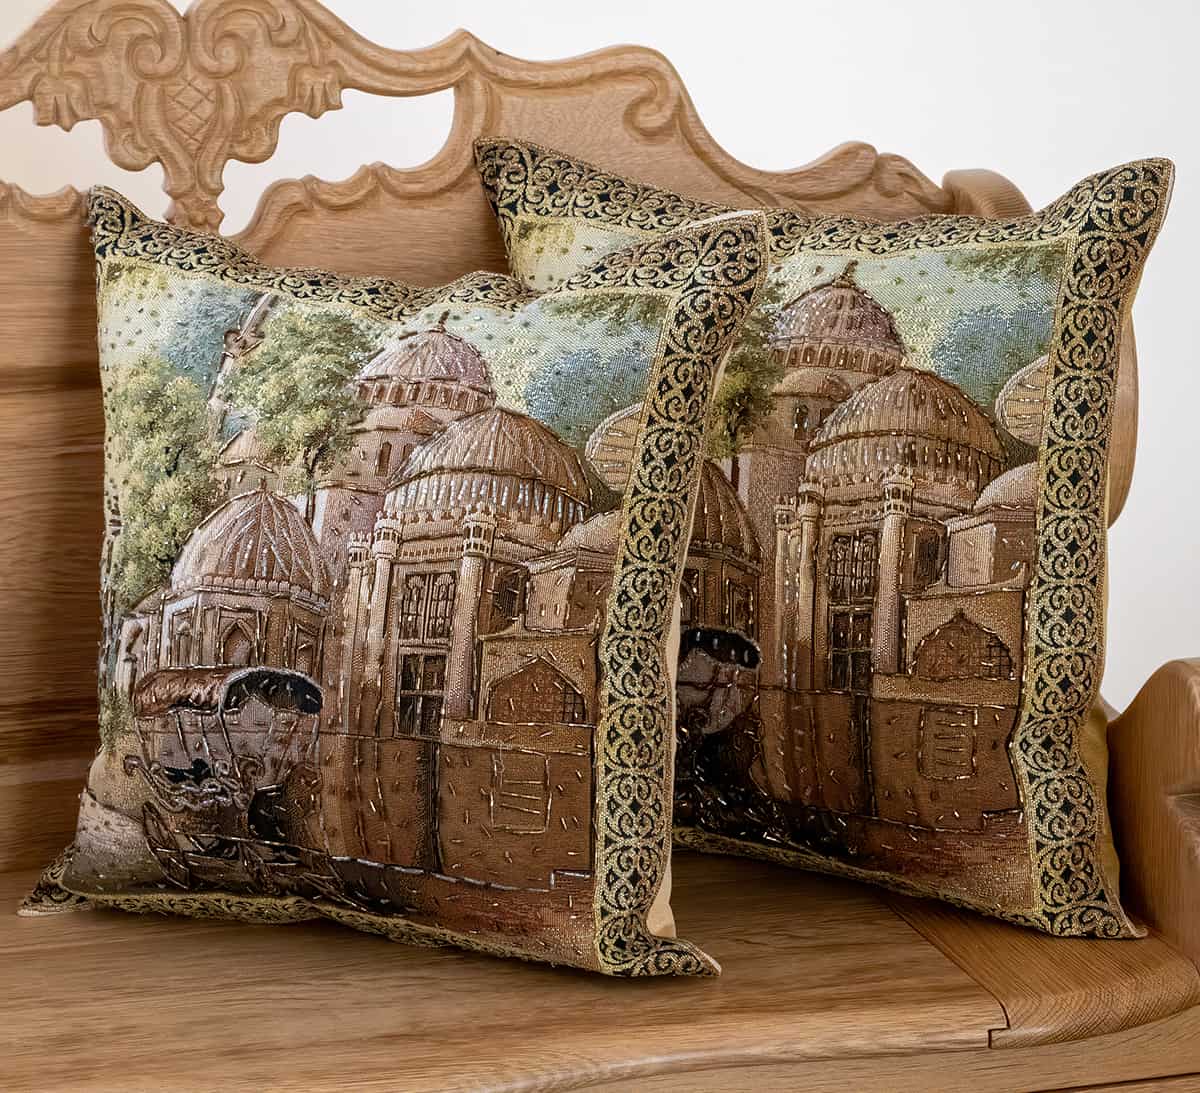 Decorative Throw Pillows With Simple Egyptian Patterns